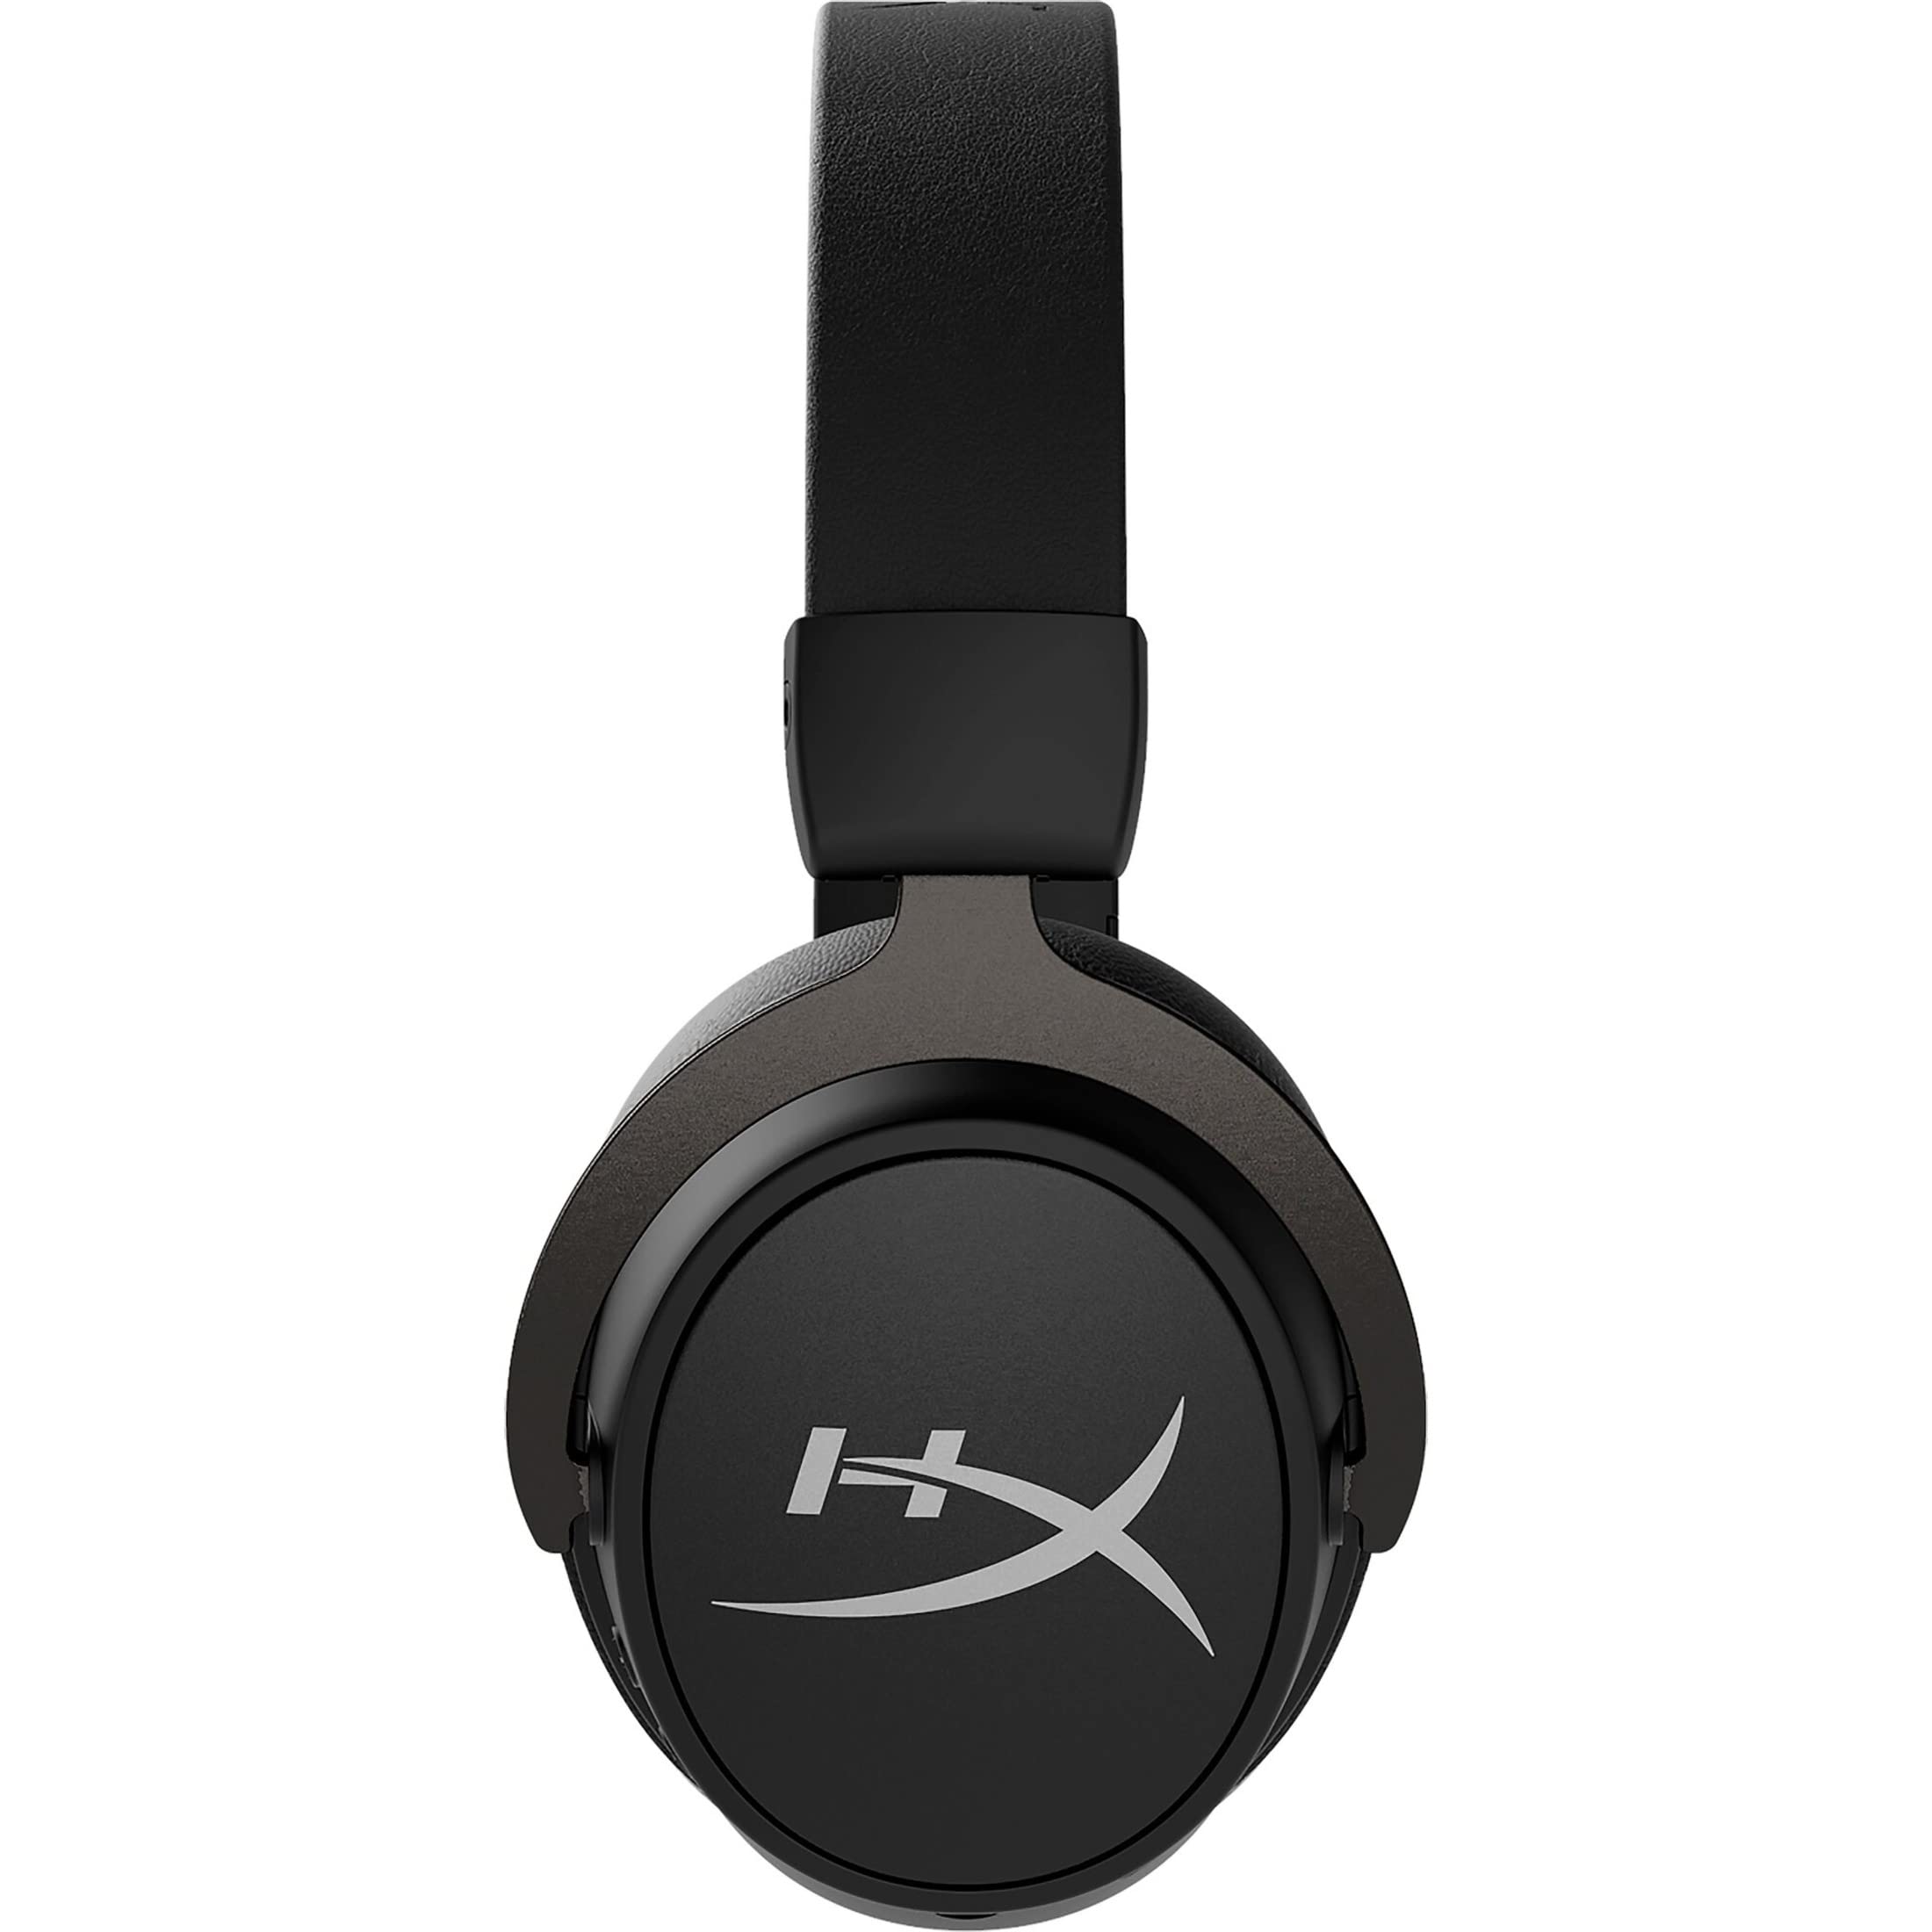 HyperX Cloud MIX - Wired Gaming Headset + Bluetooth, Game and Go, Detachable Microphone, Signature Comfort, Lightweight, Multi Platform Compatible - Black